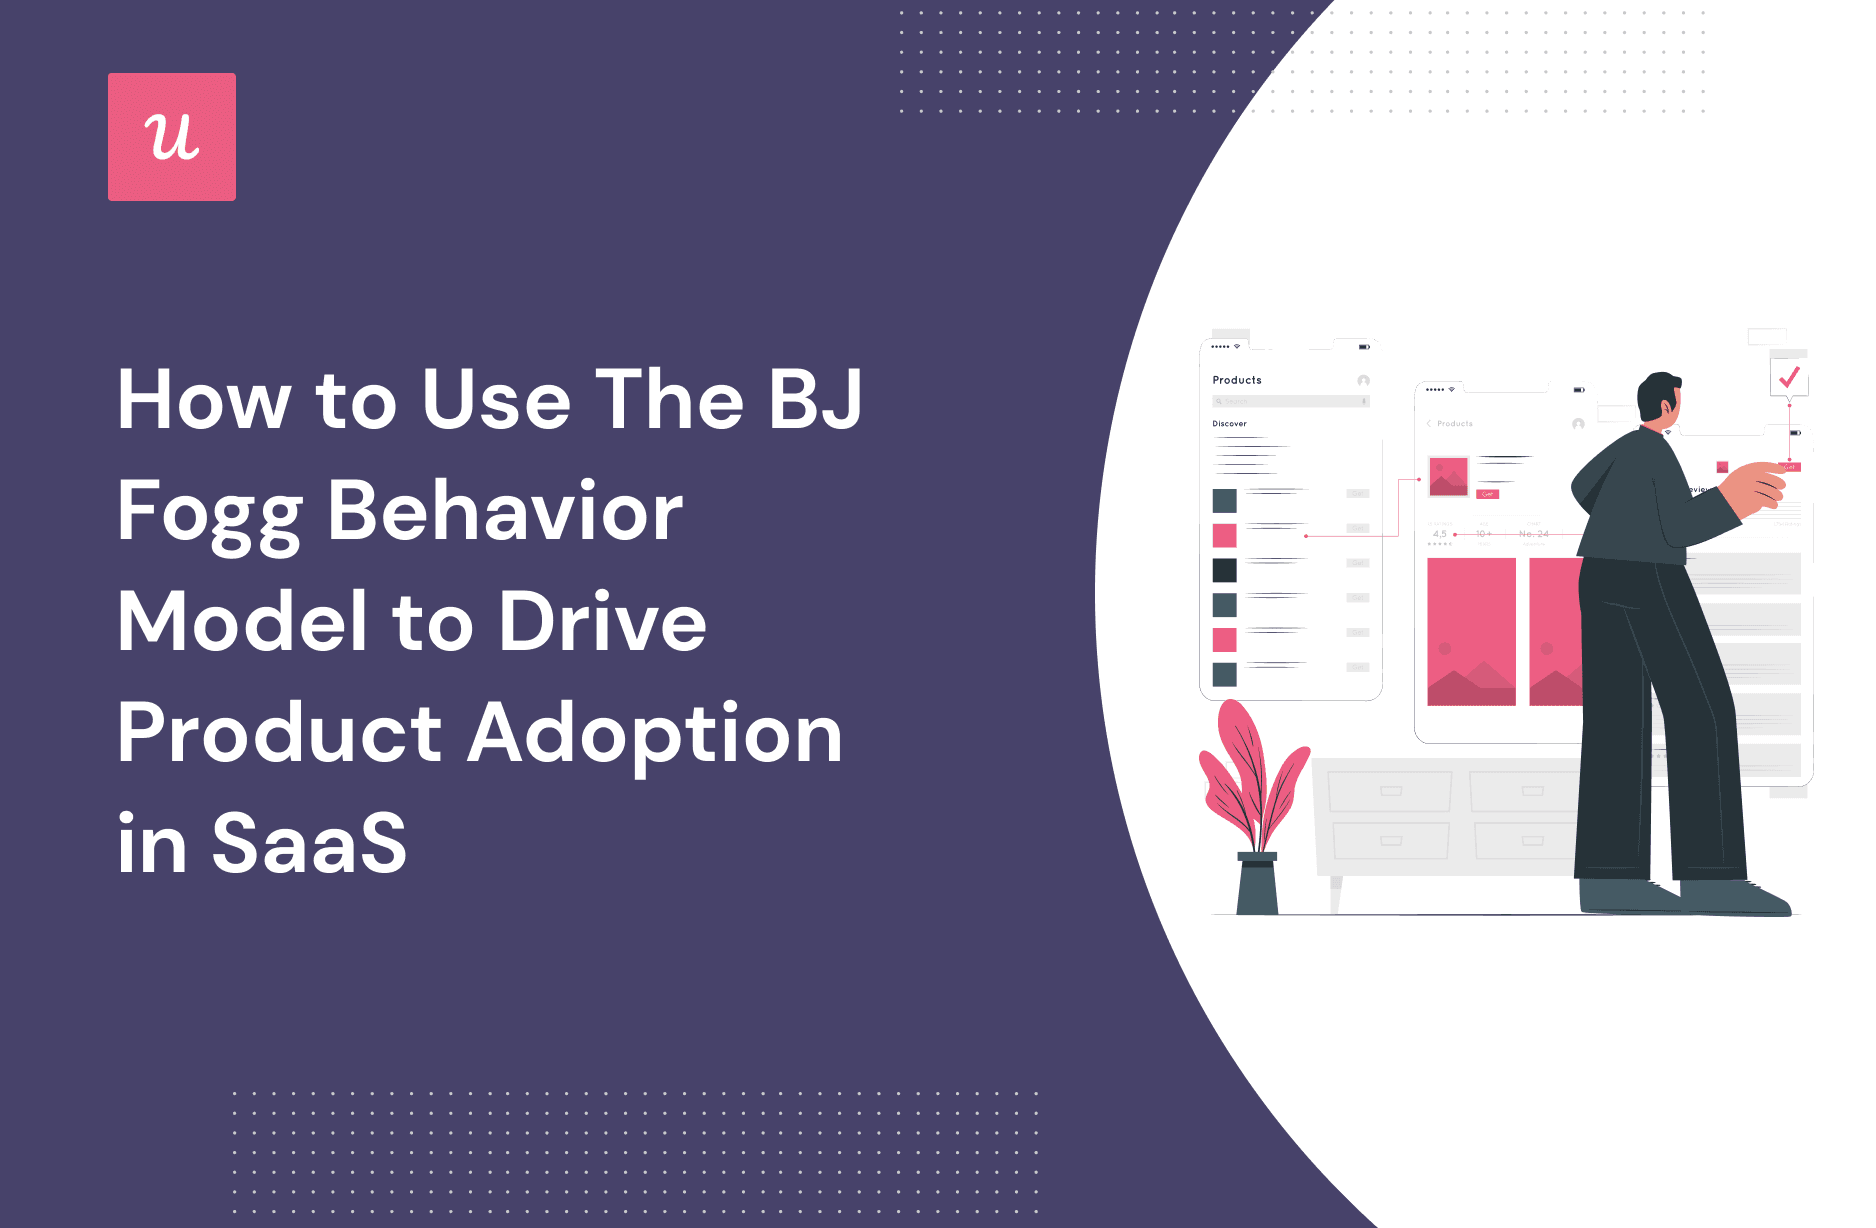 How to Use The BJ Fogg Behavior Model to Drive Product Adoption in SaaS cover